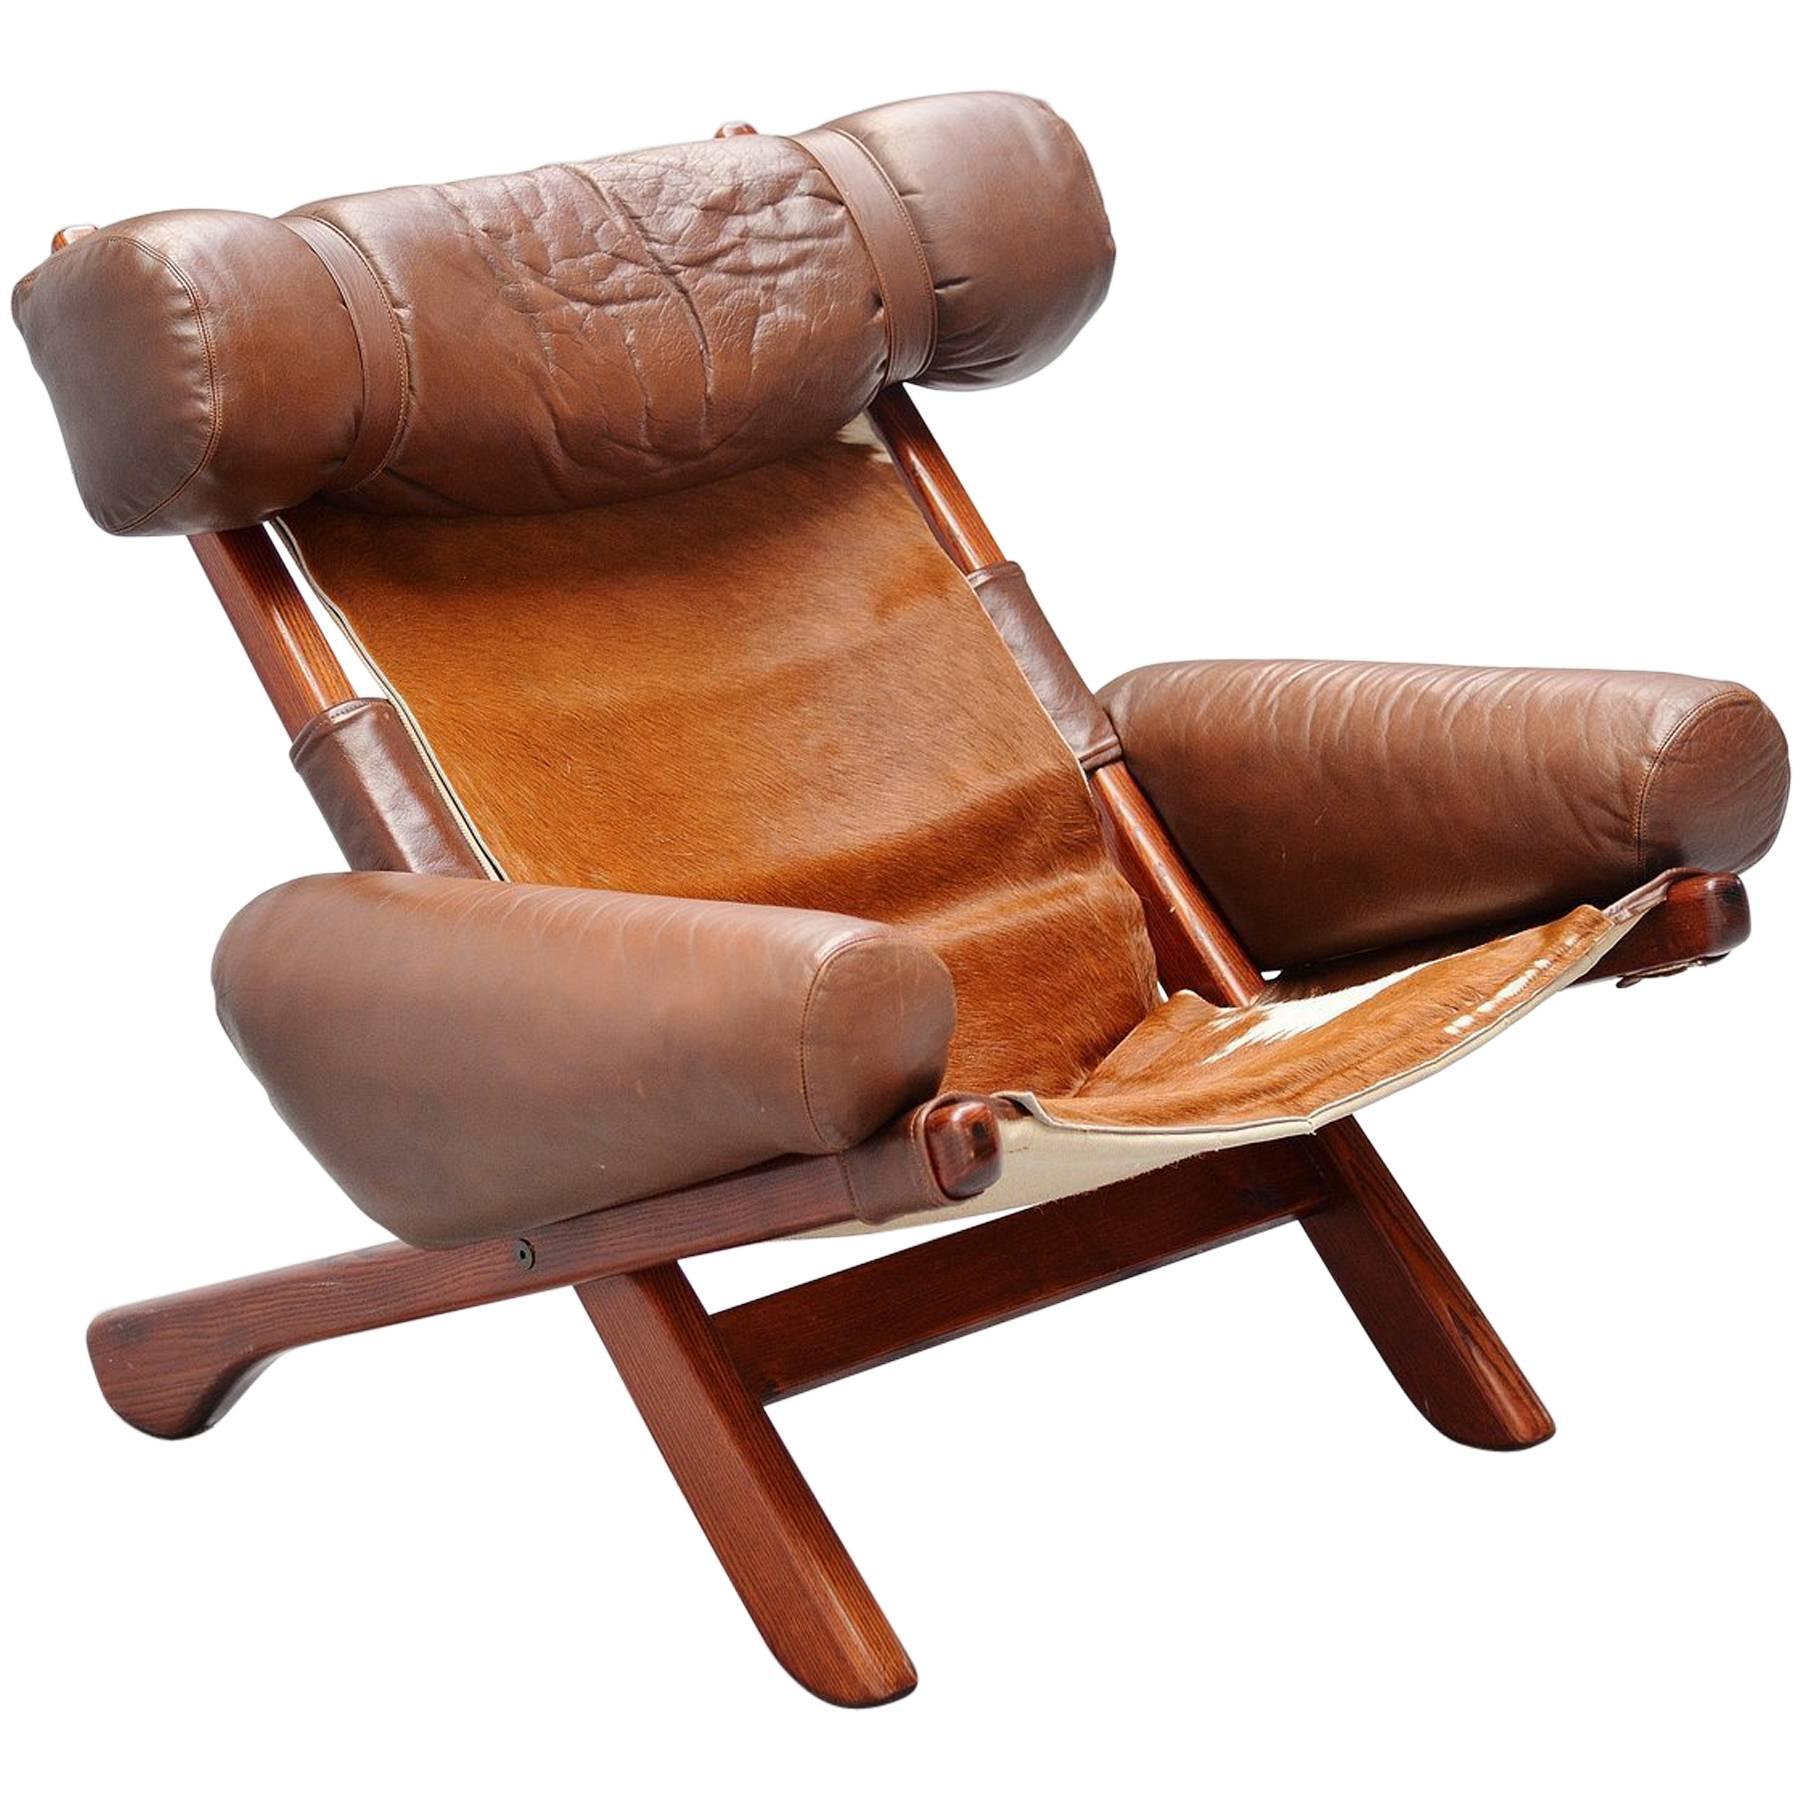 Unusual Lounge Chair with Cow Skin Seat, Brazil, 1970